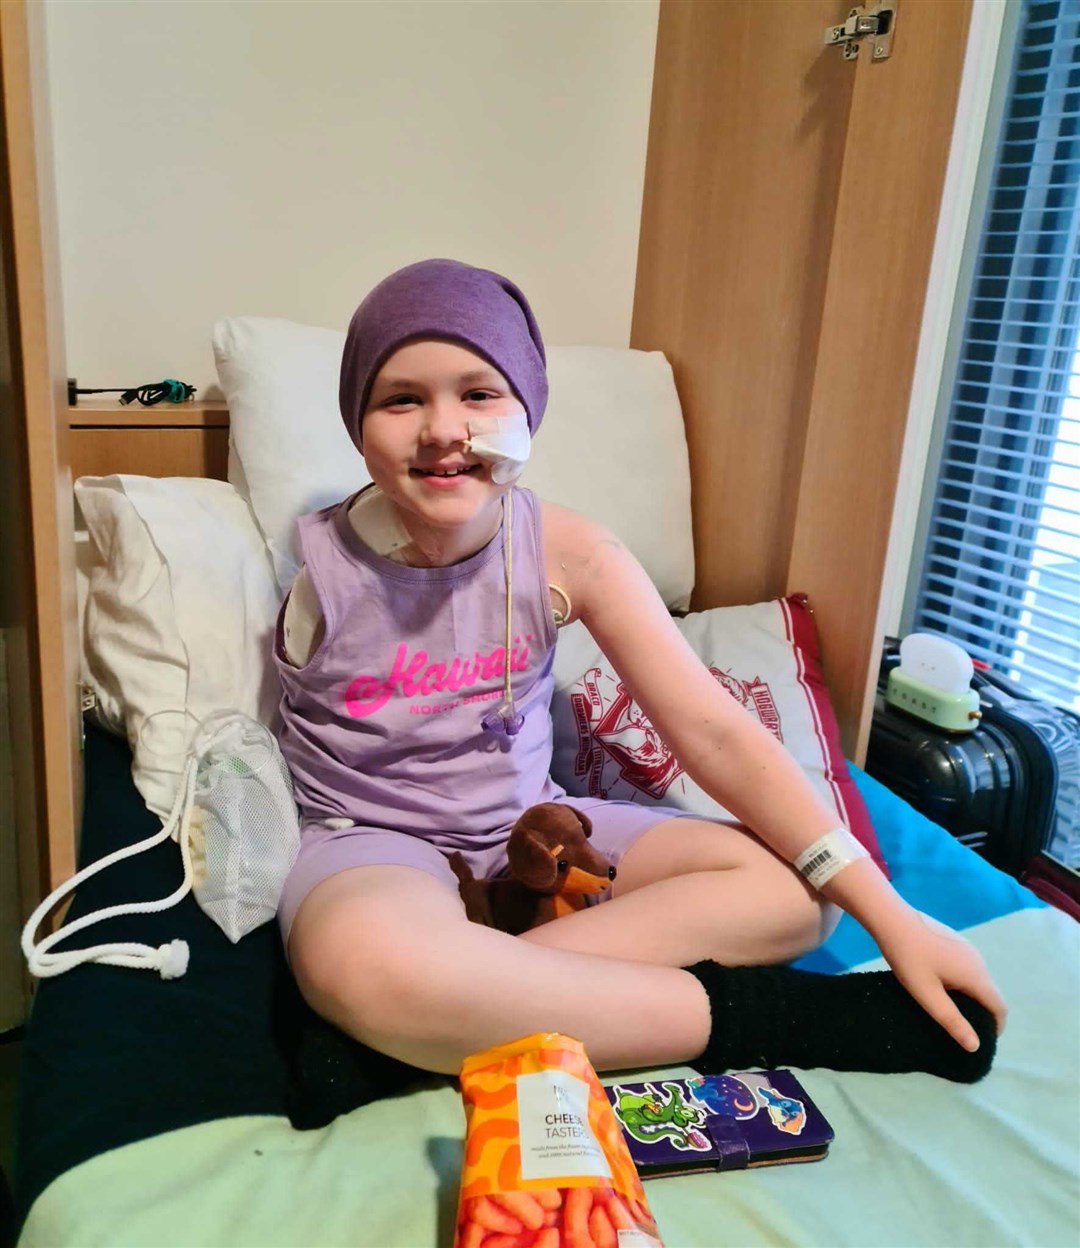 Ailsa Fraser lost an arm to bone cancer and is going through rounds of chemotherapy.